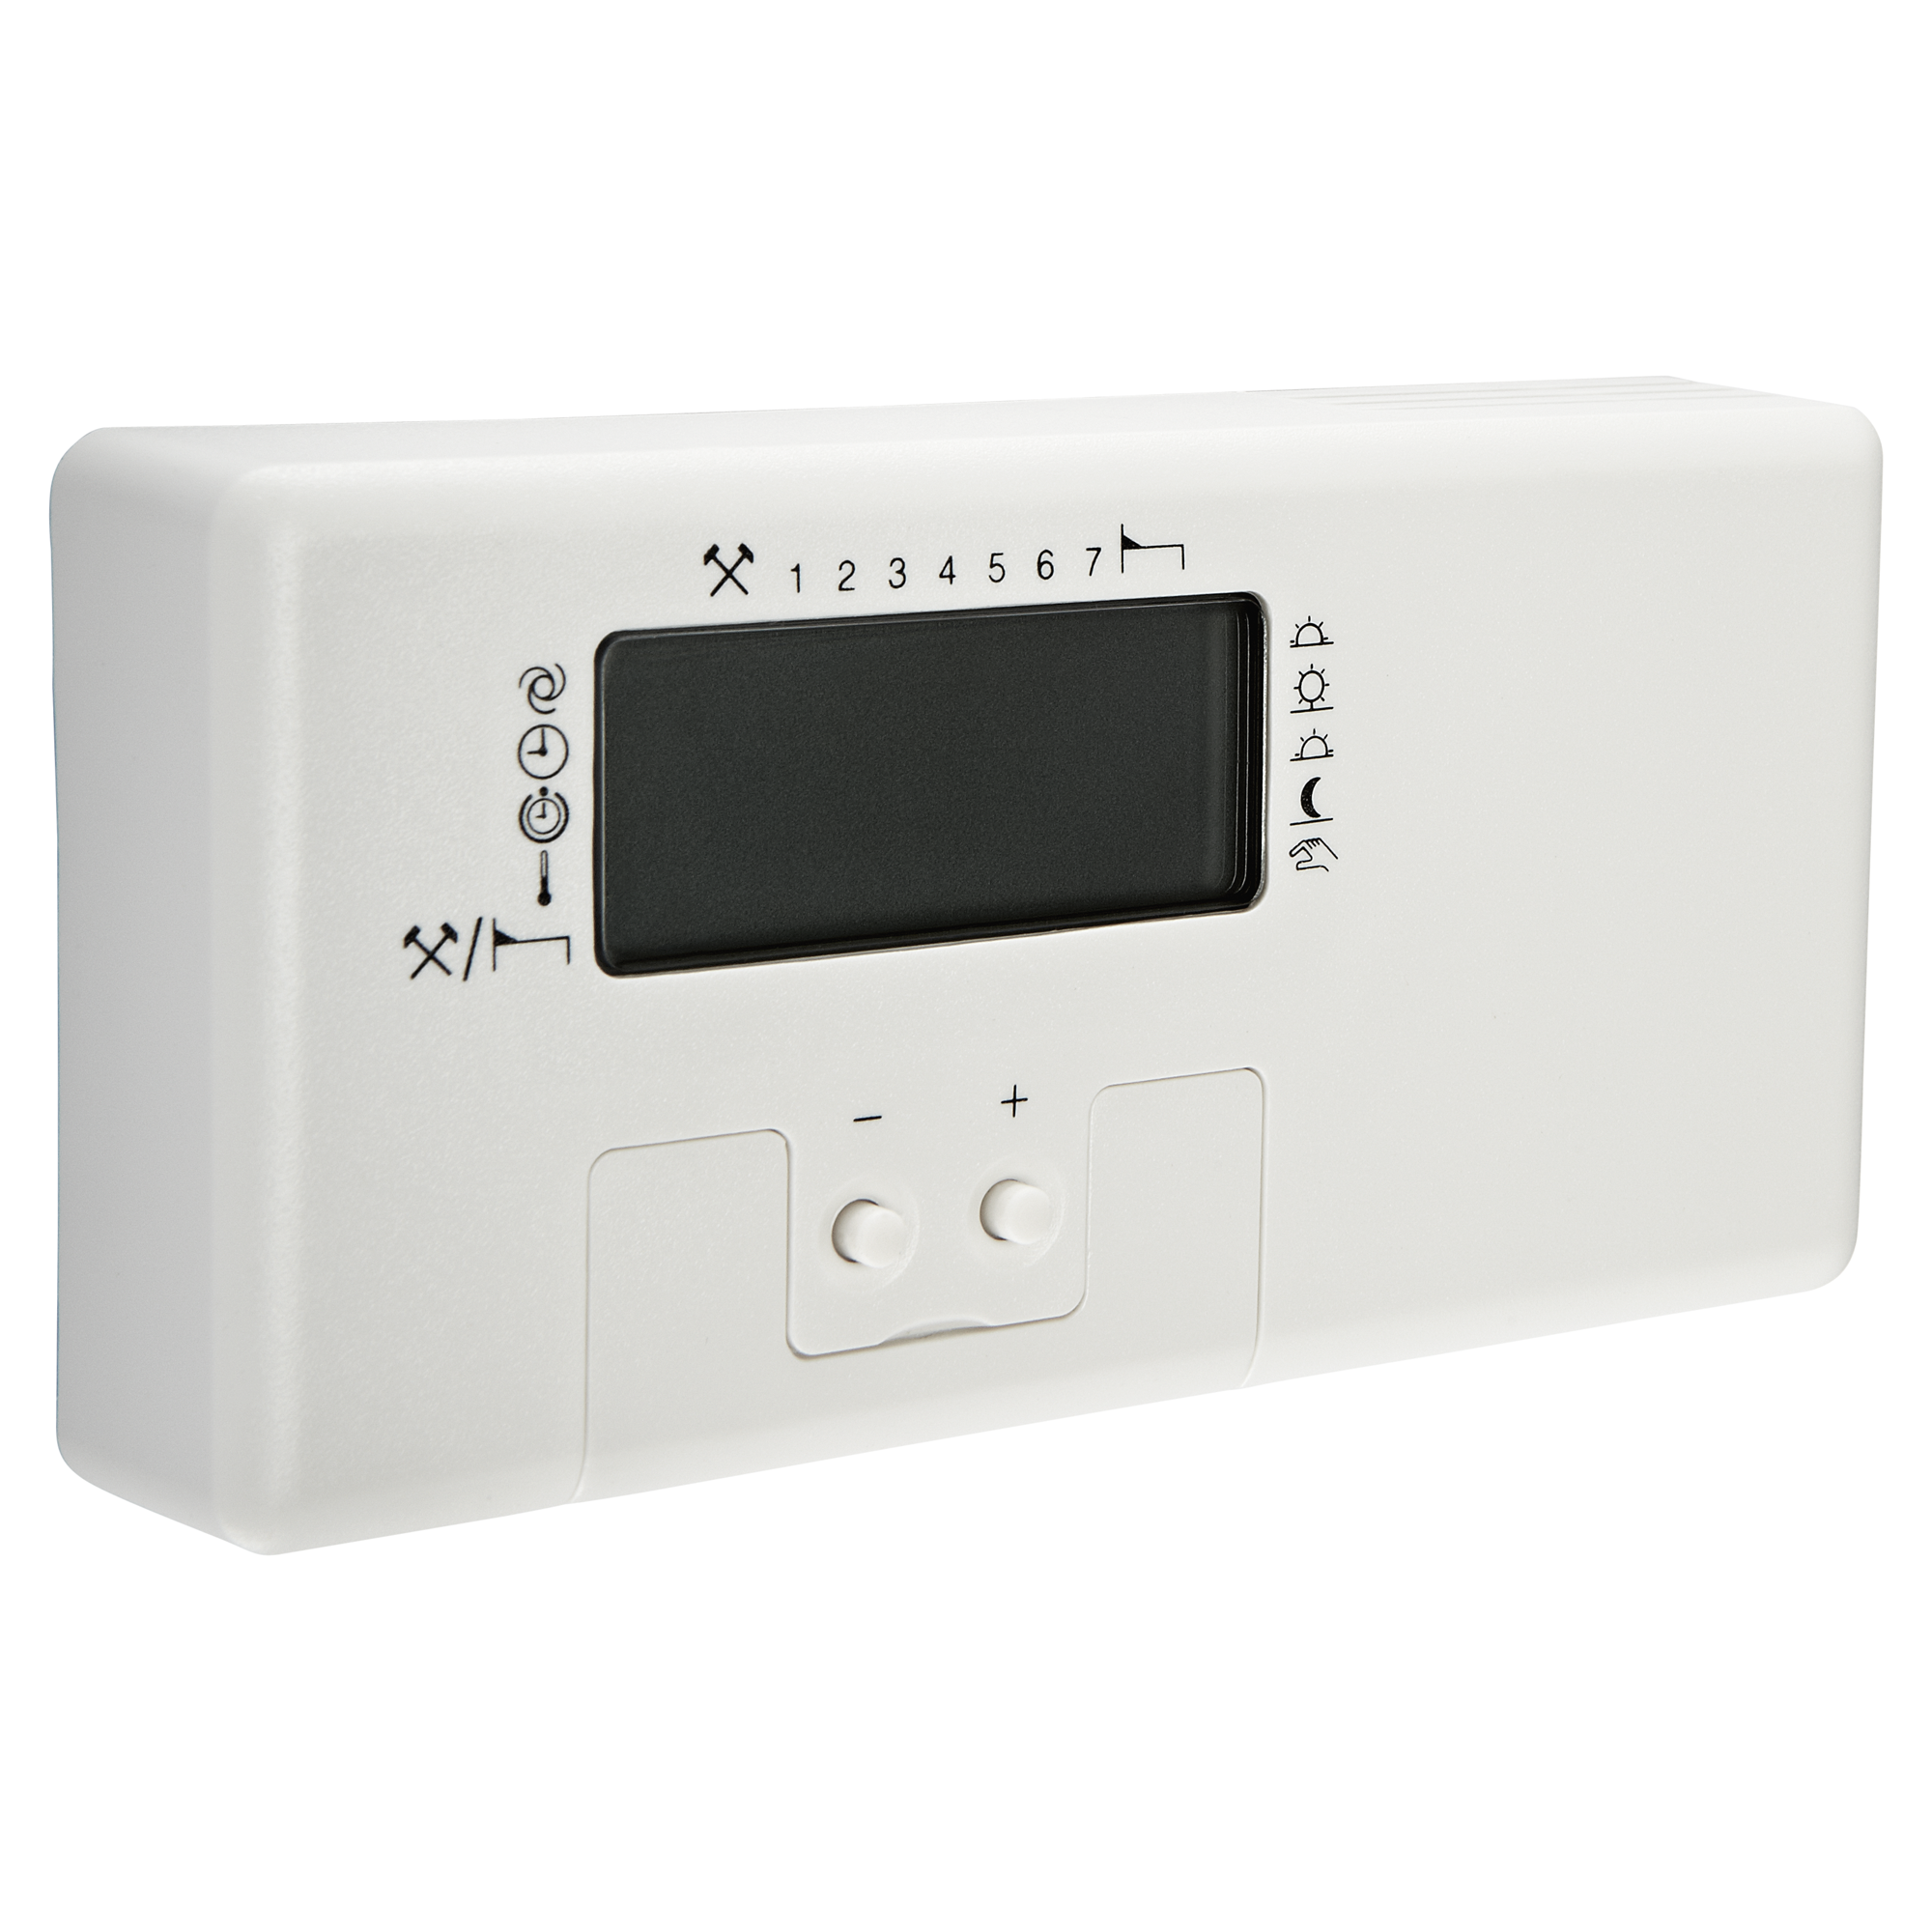 Uhren-Raumthermostat digital + product picture